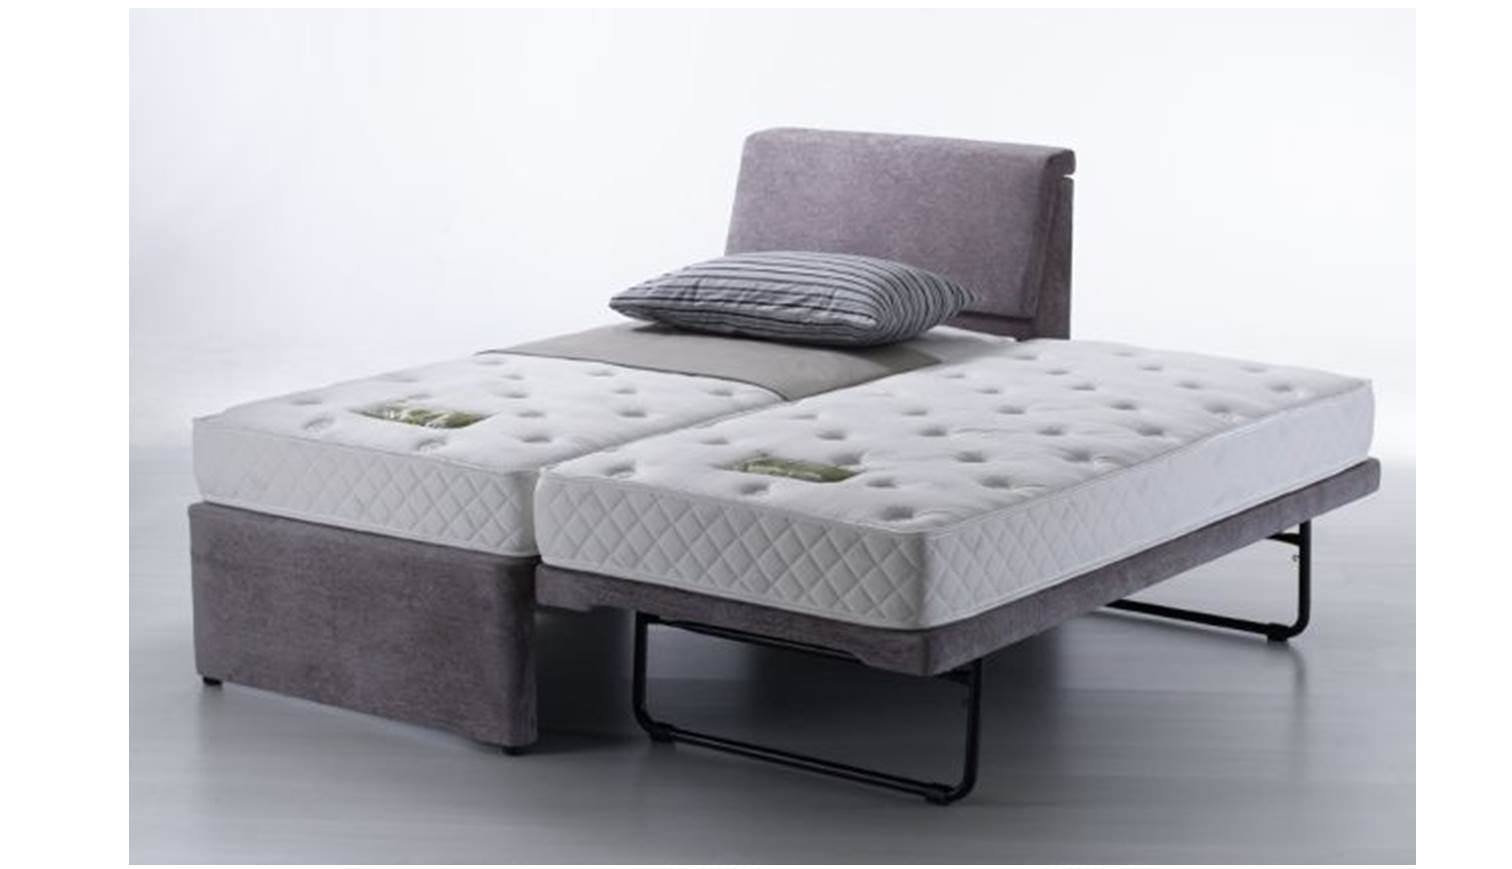 Unice Single Bed Frame With Single Pullout Bed ?fit=fill&bg=0FFF&w=1512&h=869&auto=format,compress